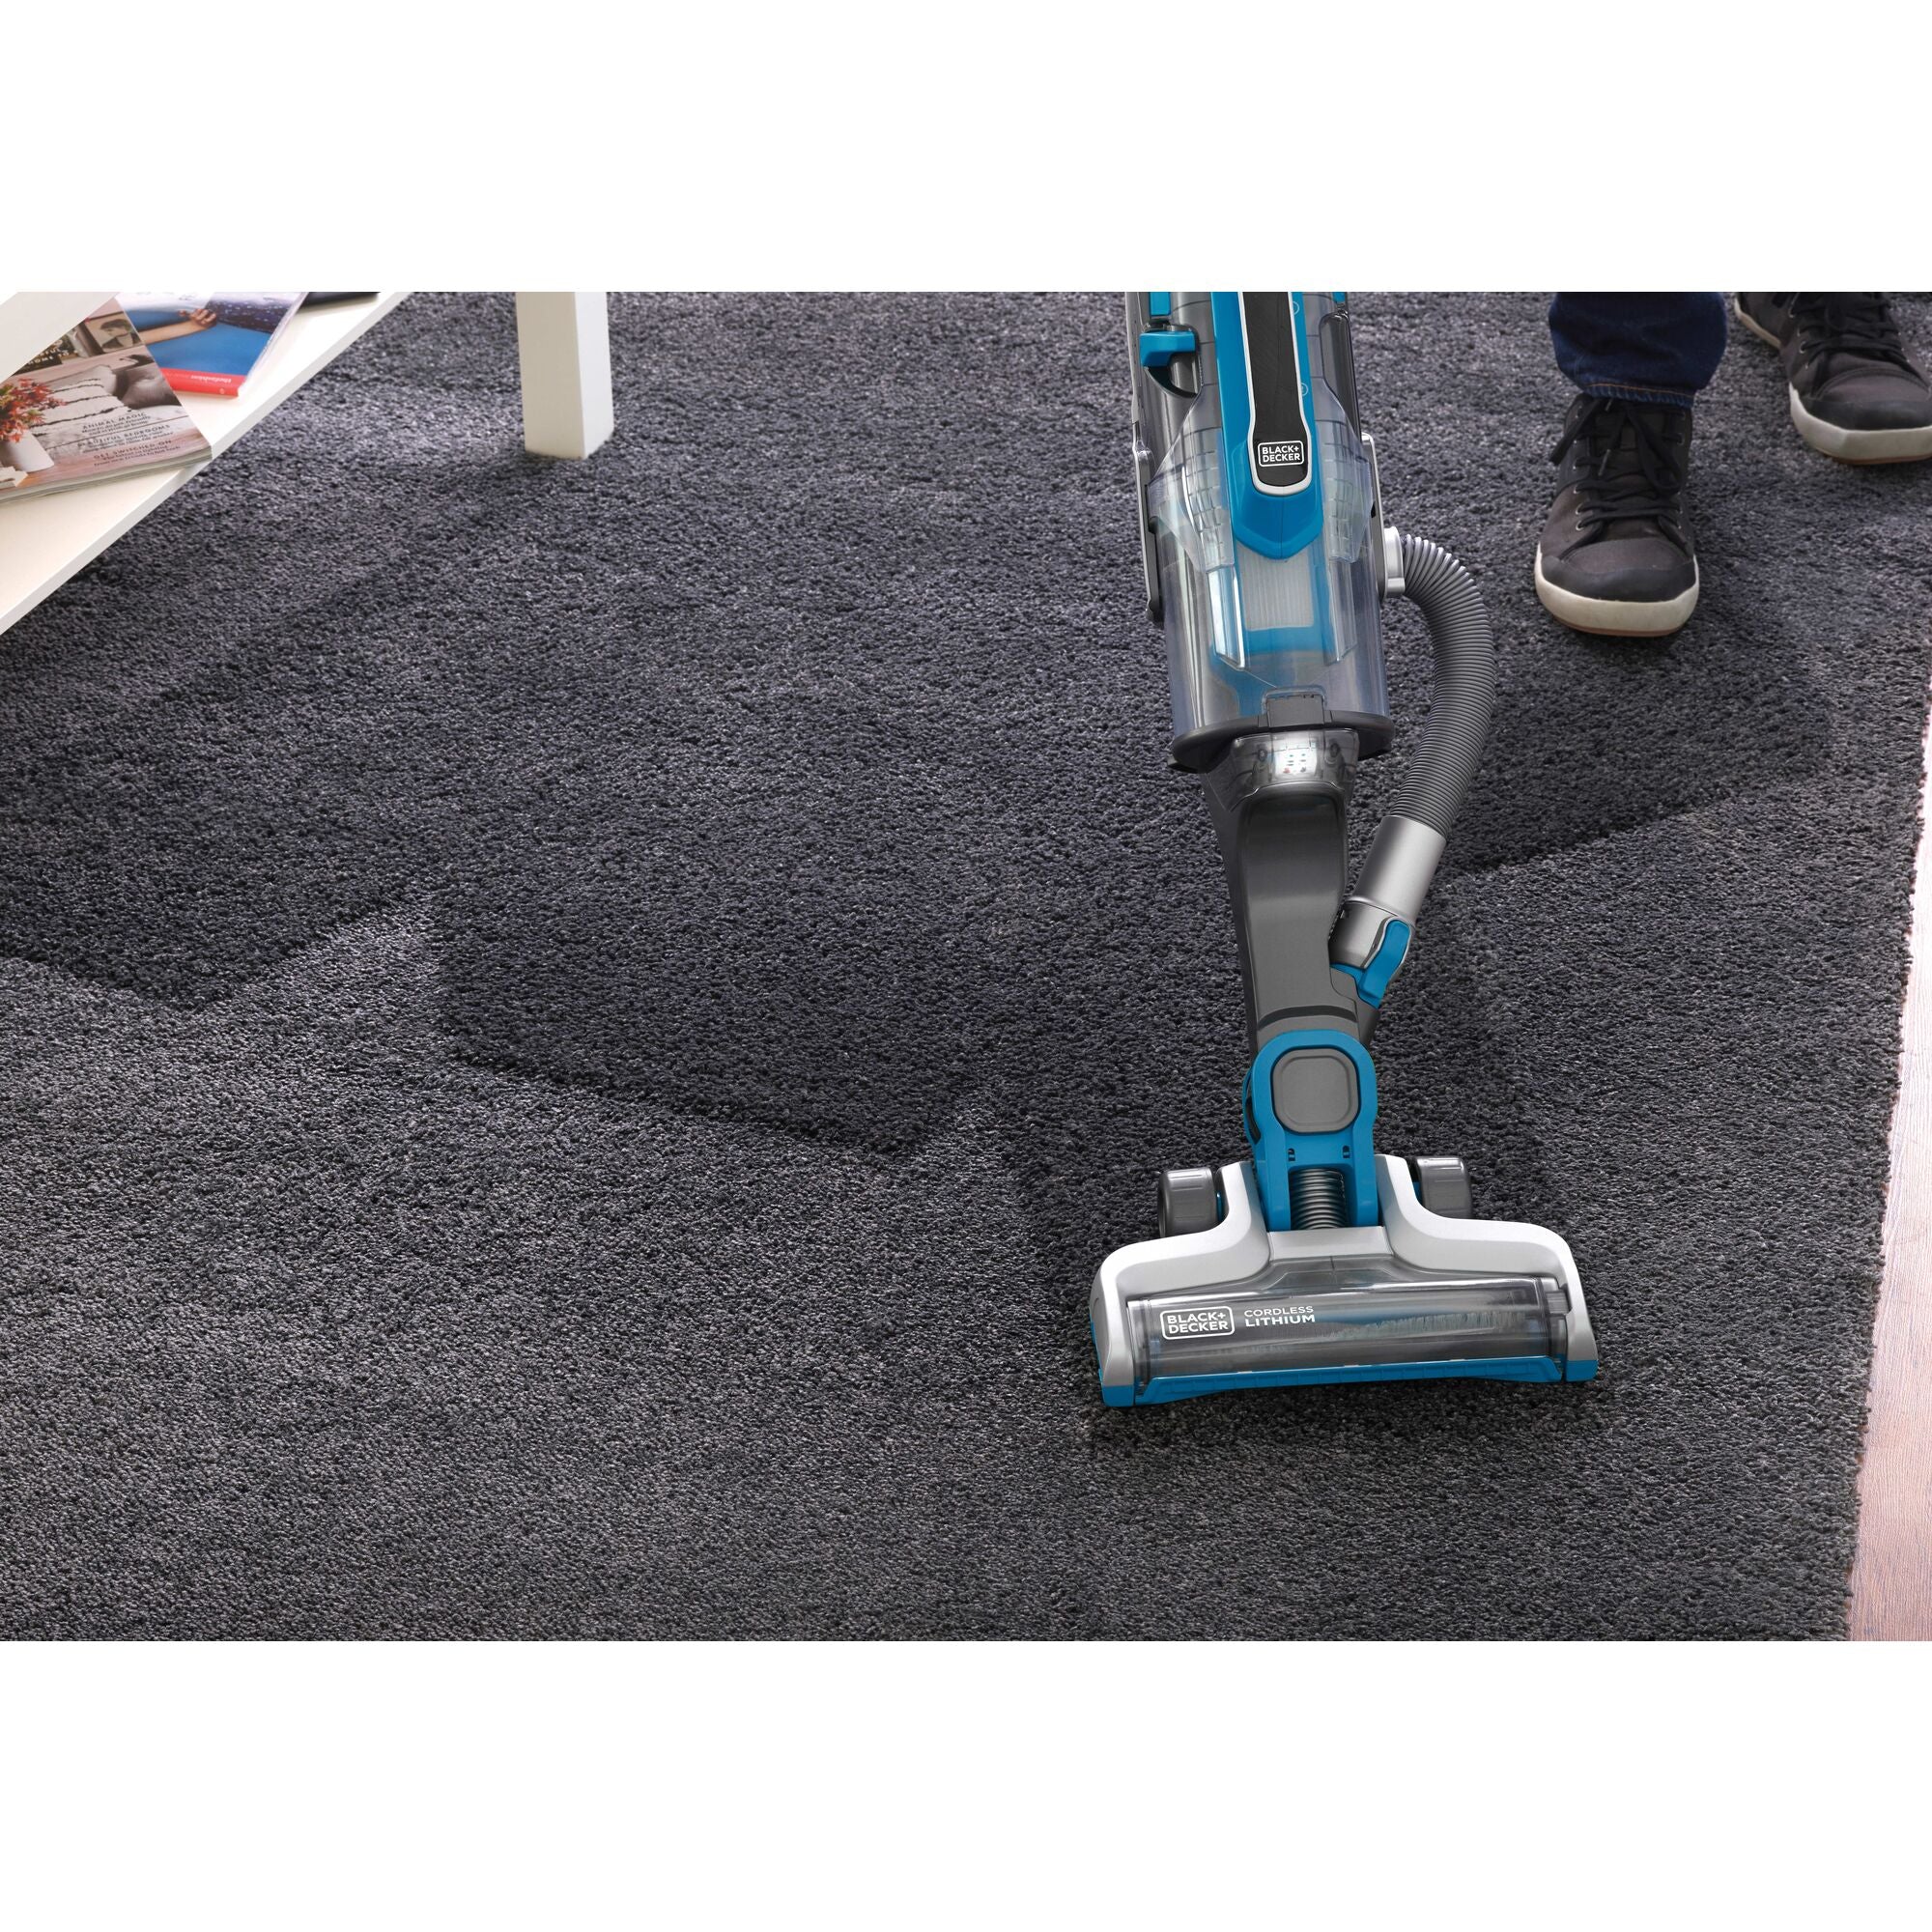 POWER SERIES PRO Cordless 2 in 1  Vacuum being used to clean rug.